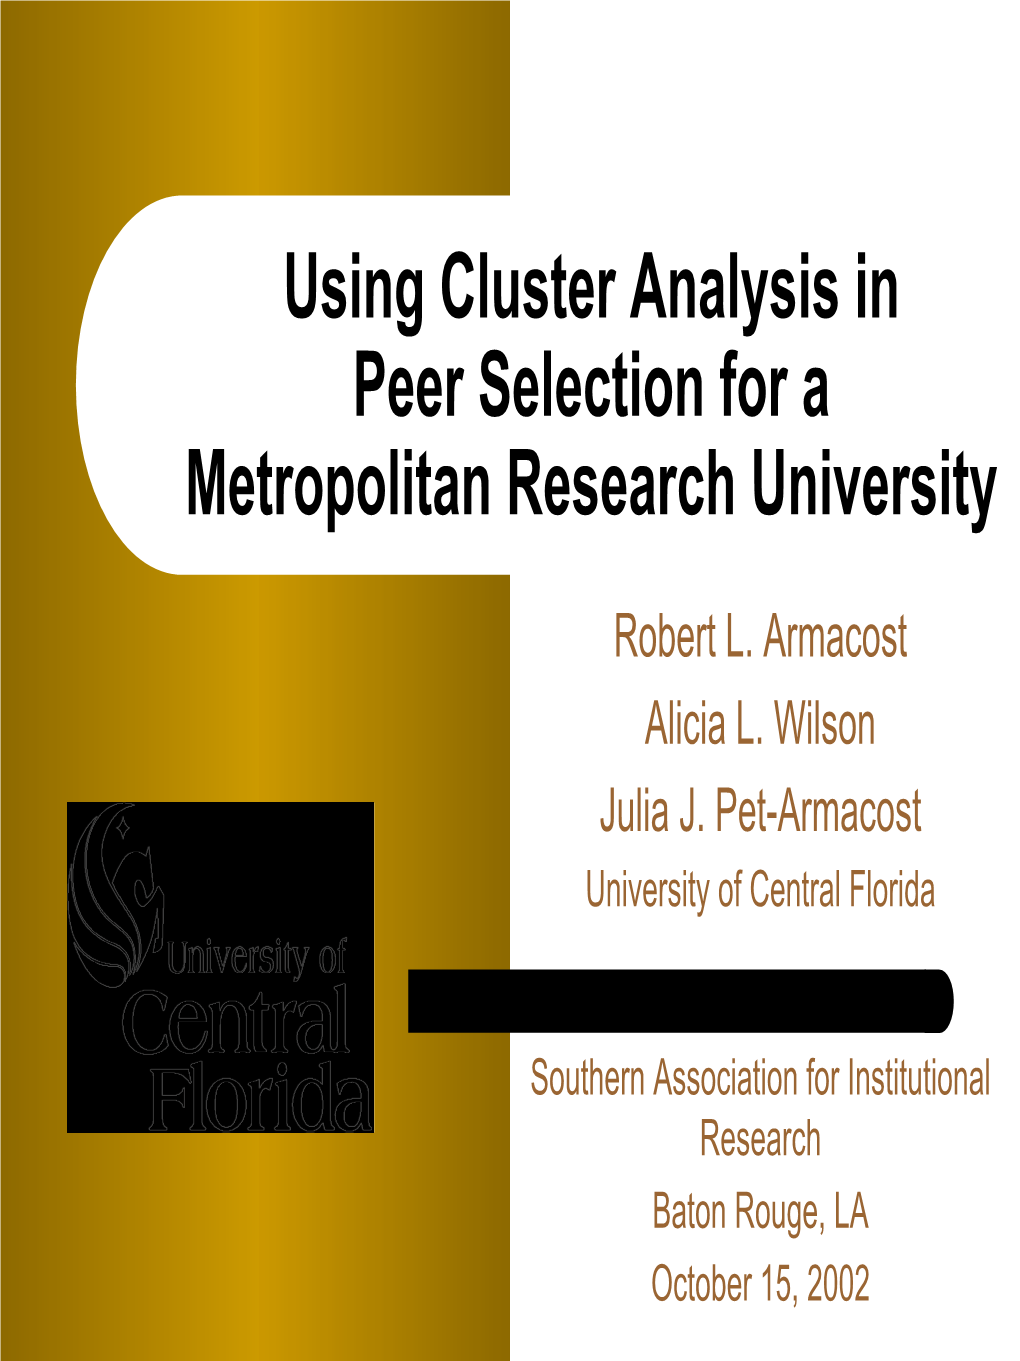 Using Cluster Analysis for Peer Selection